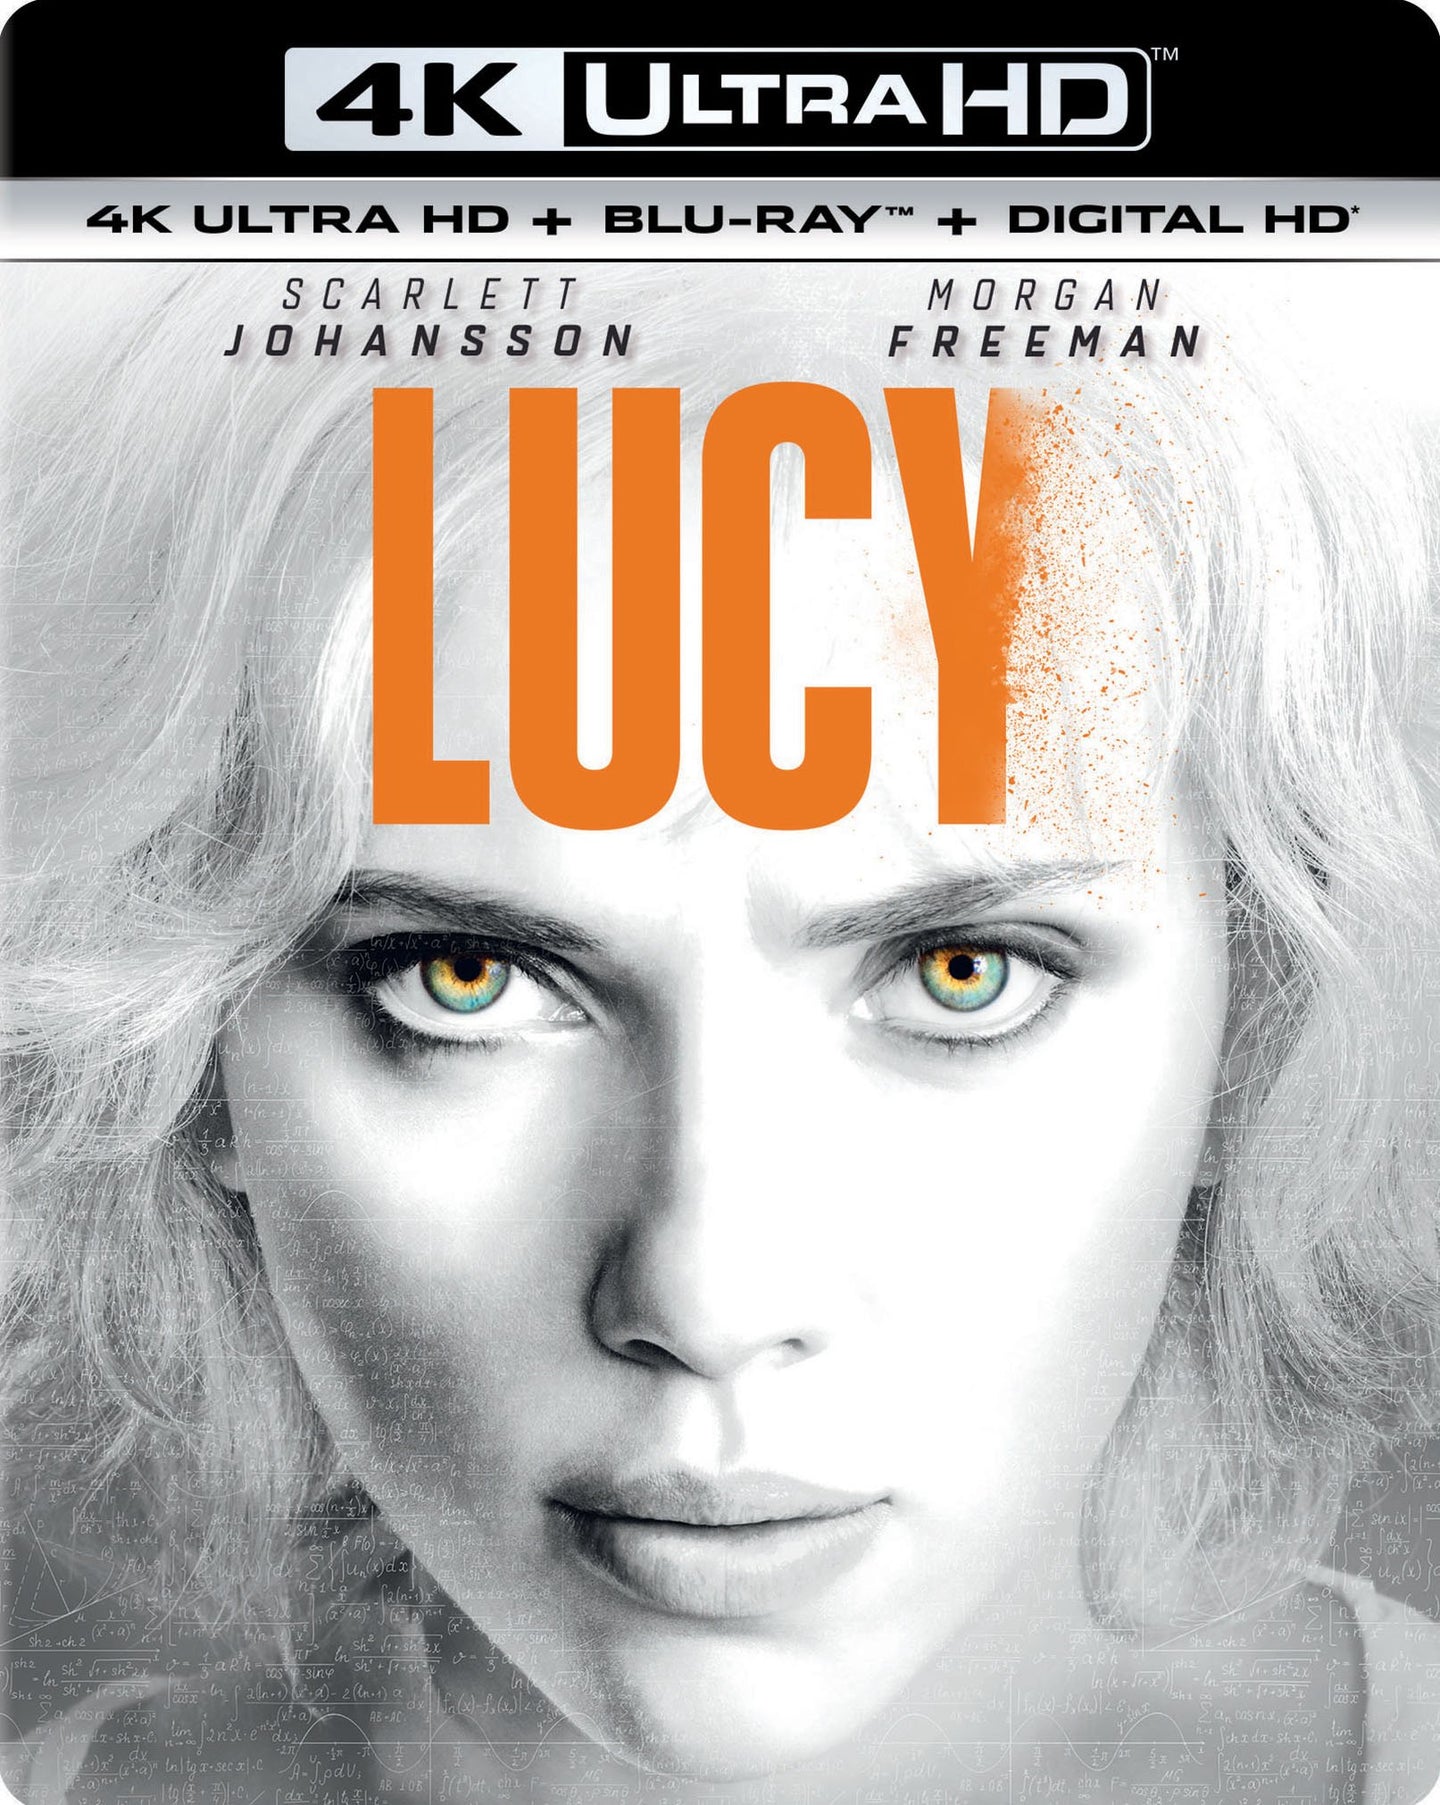 Lucy (2014) Vudu or Movies Anywhere 4K redemption only